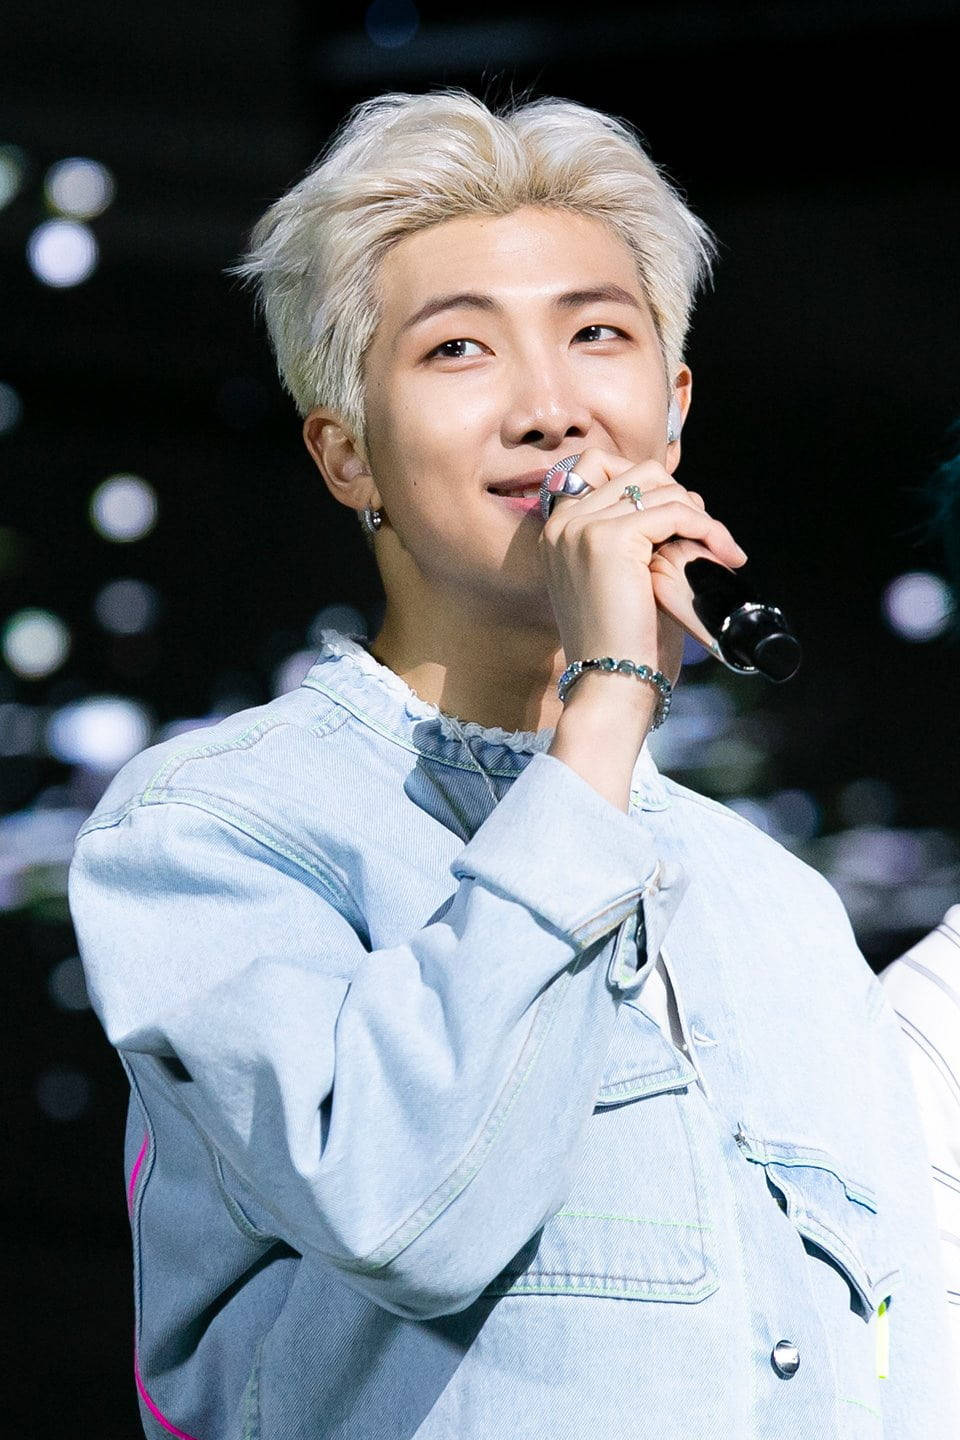 Top 999 Bts Rm Cute Wallpaper Full Hd 4k Free To Use